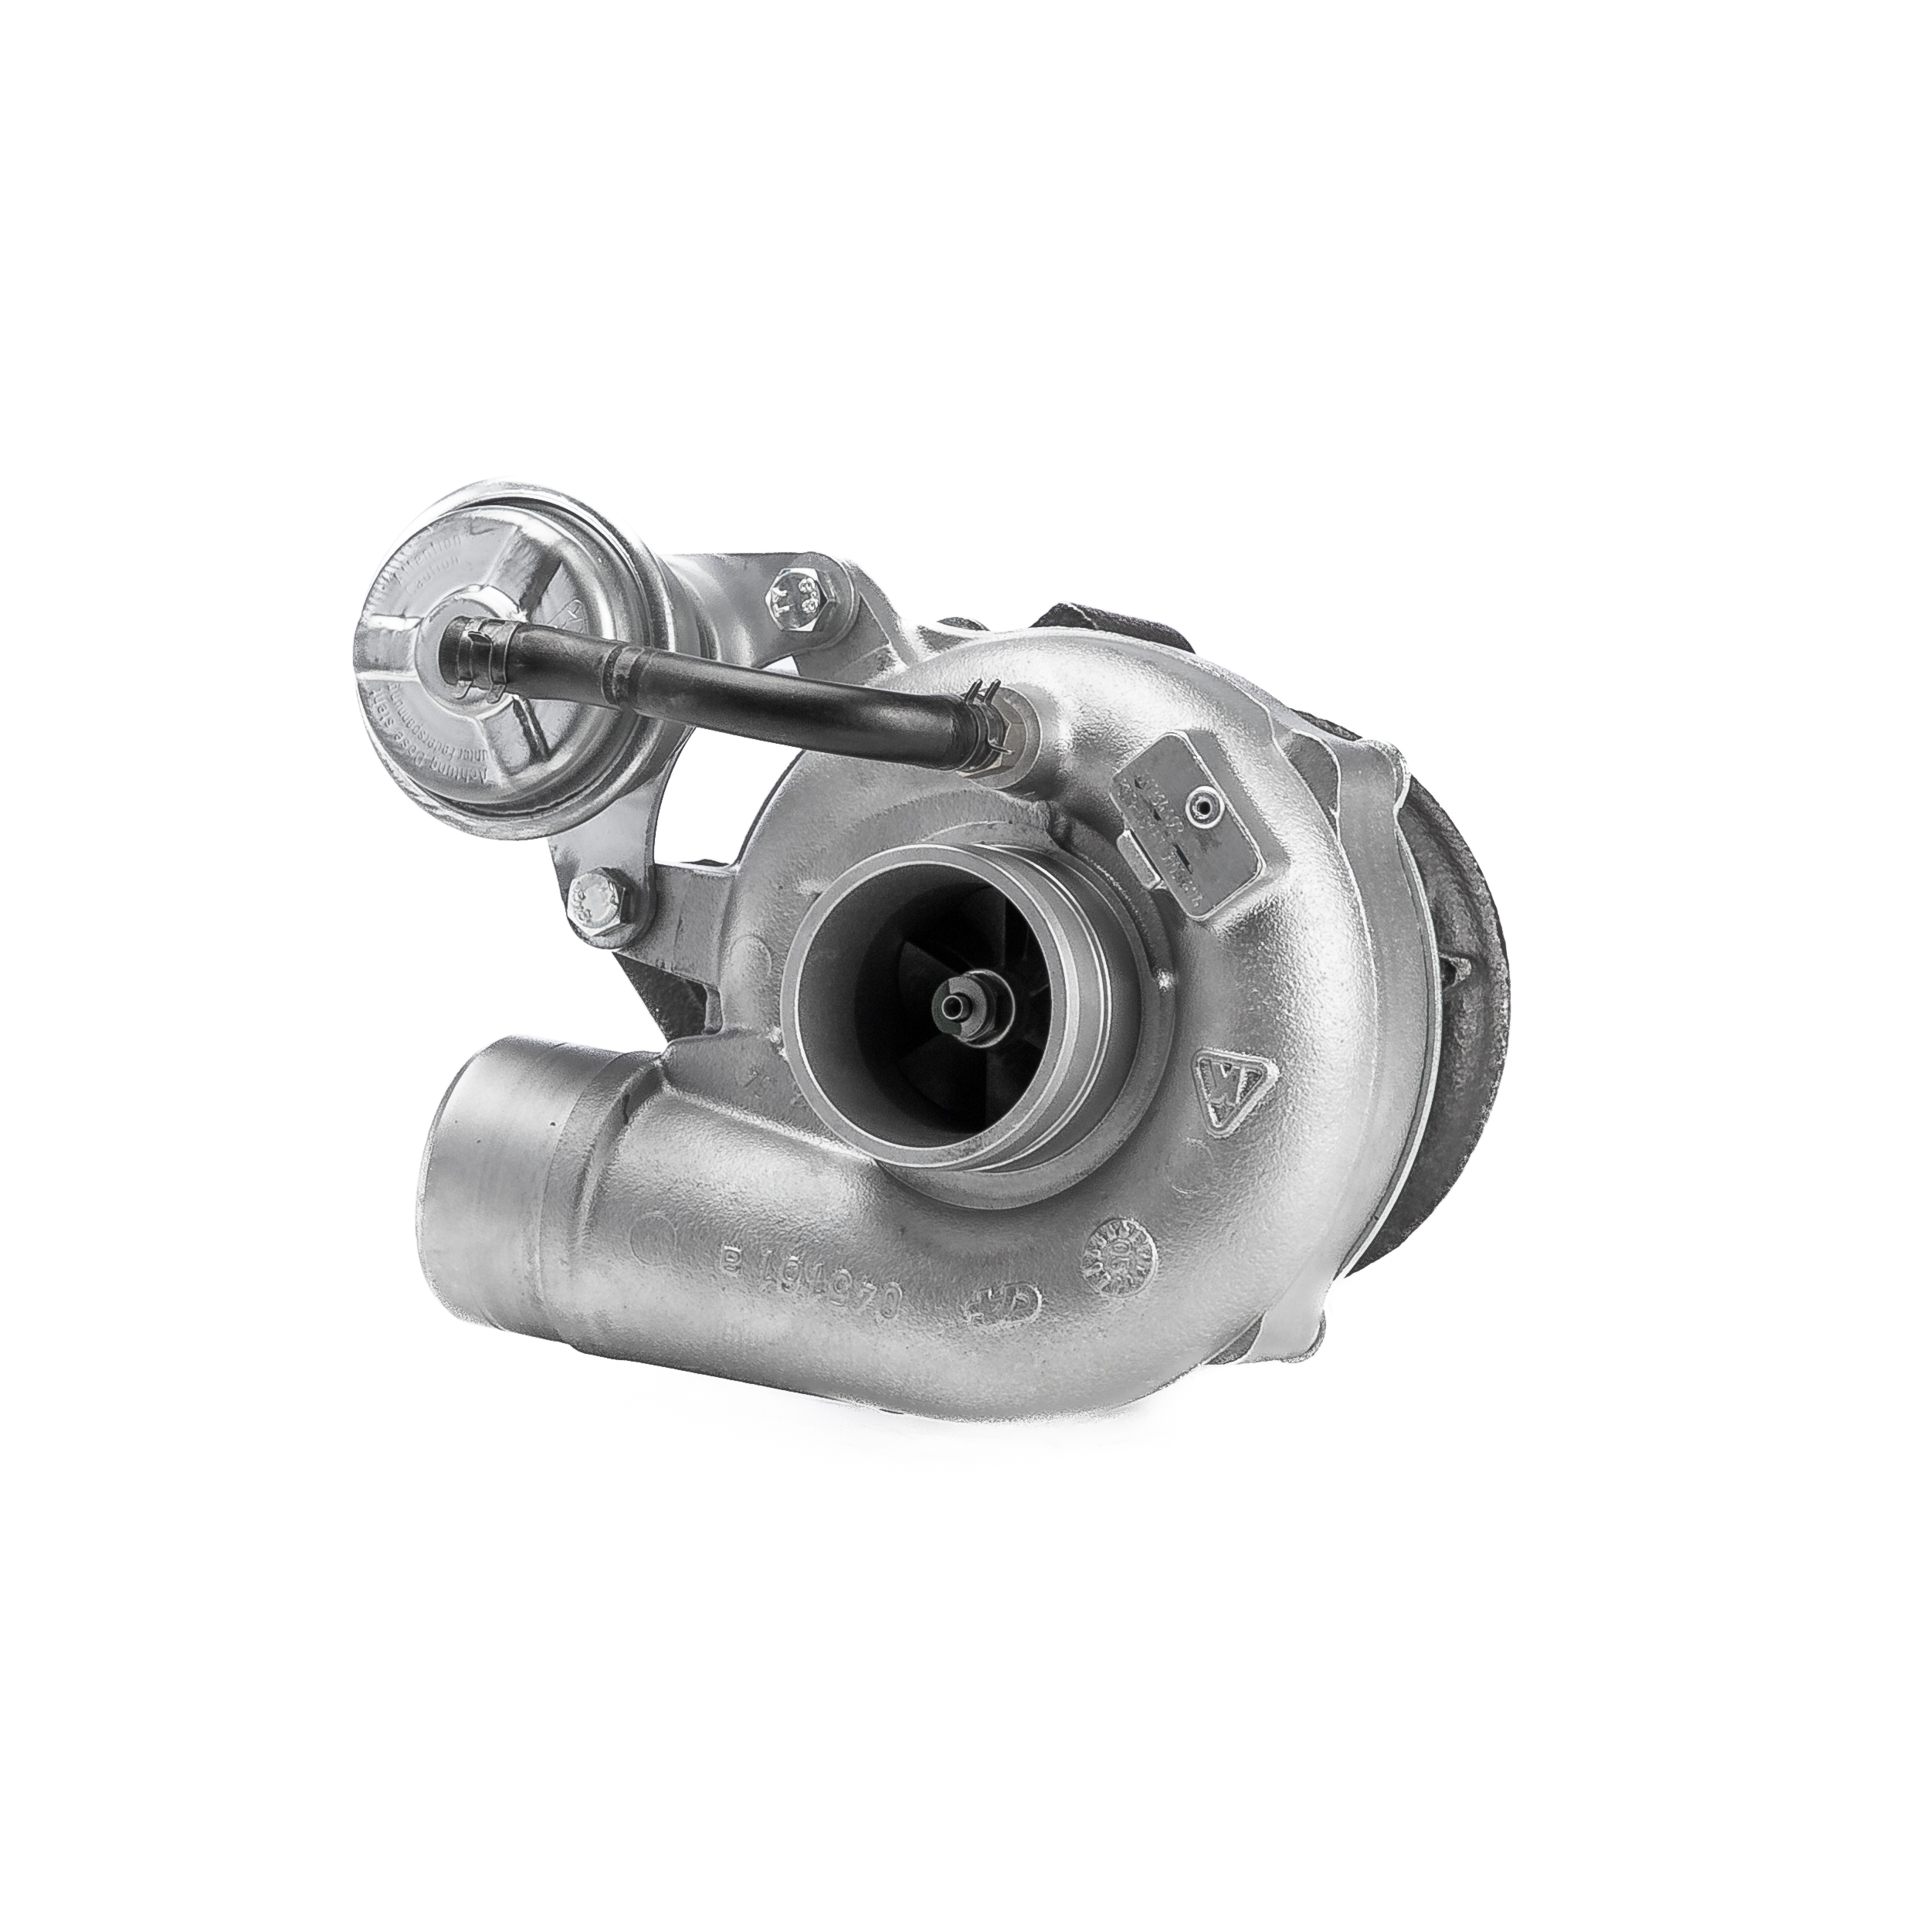 BR Turbo 53039880081RS Turbocharger 0375 F6